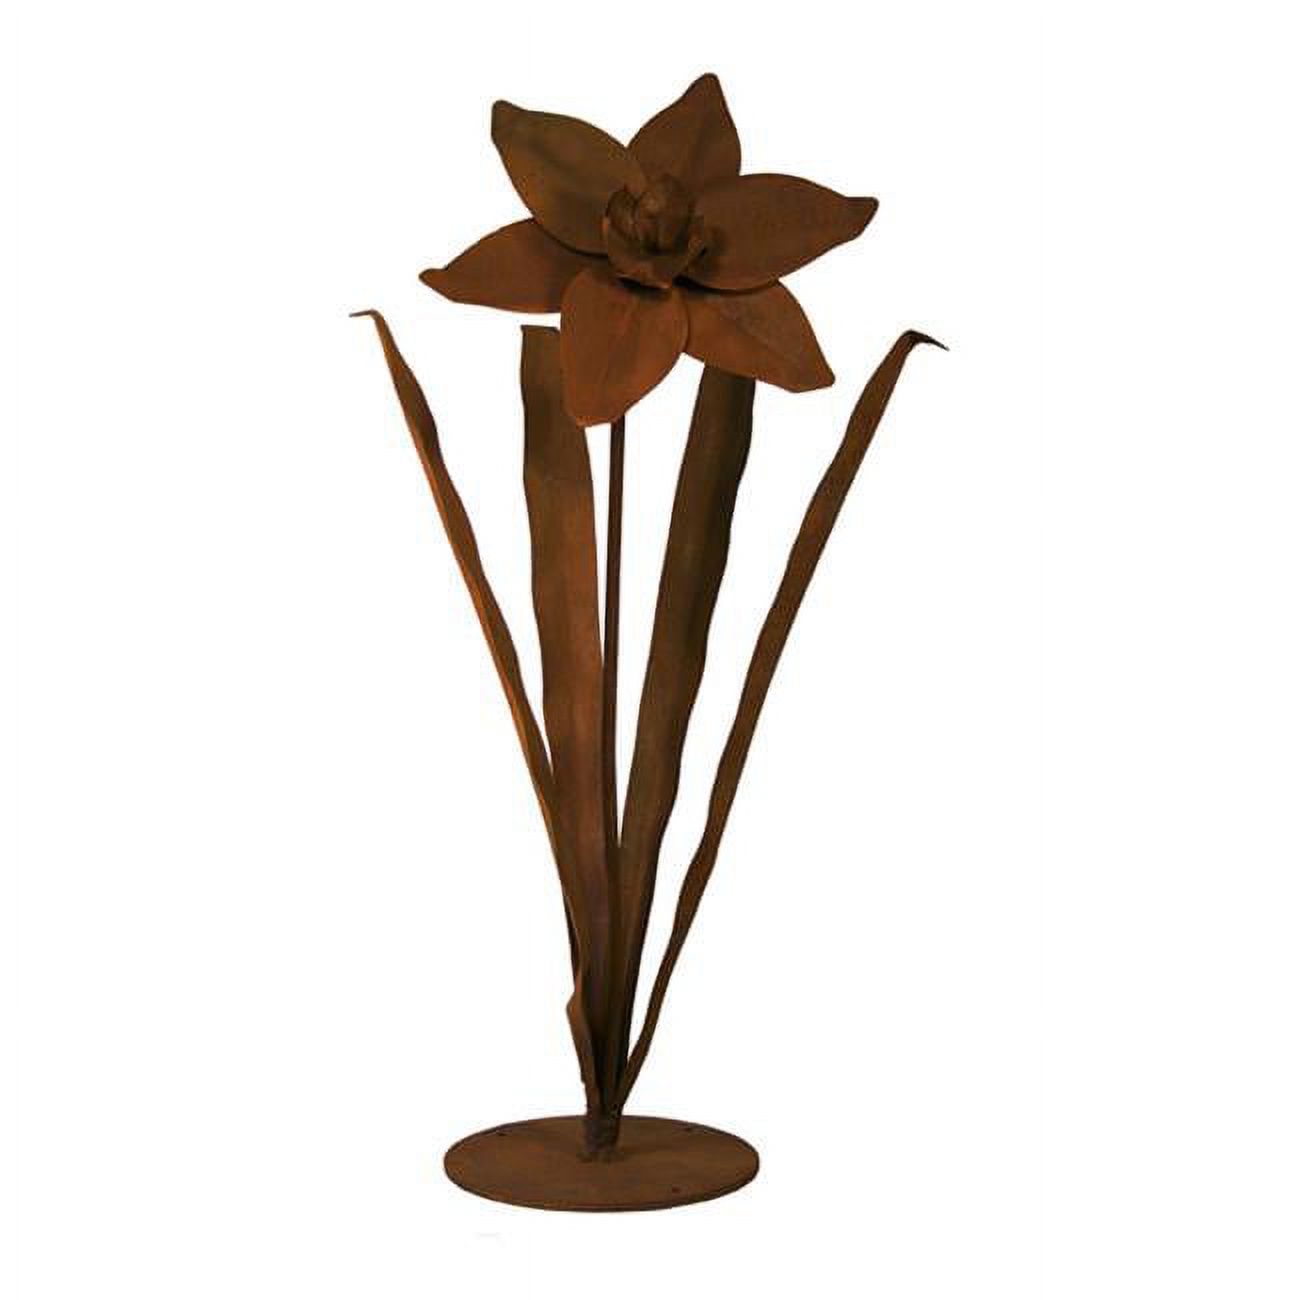 Patina Daffodil Outdoor Metal Sculpture - image 1 of 2